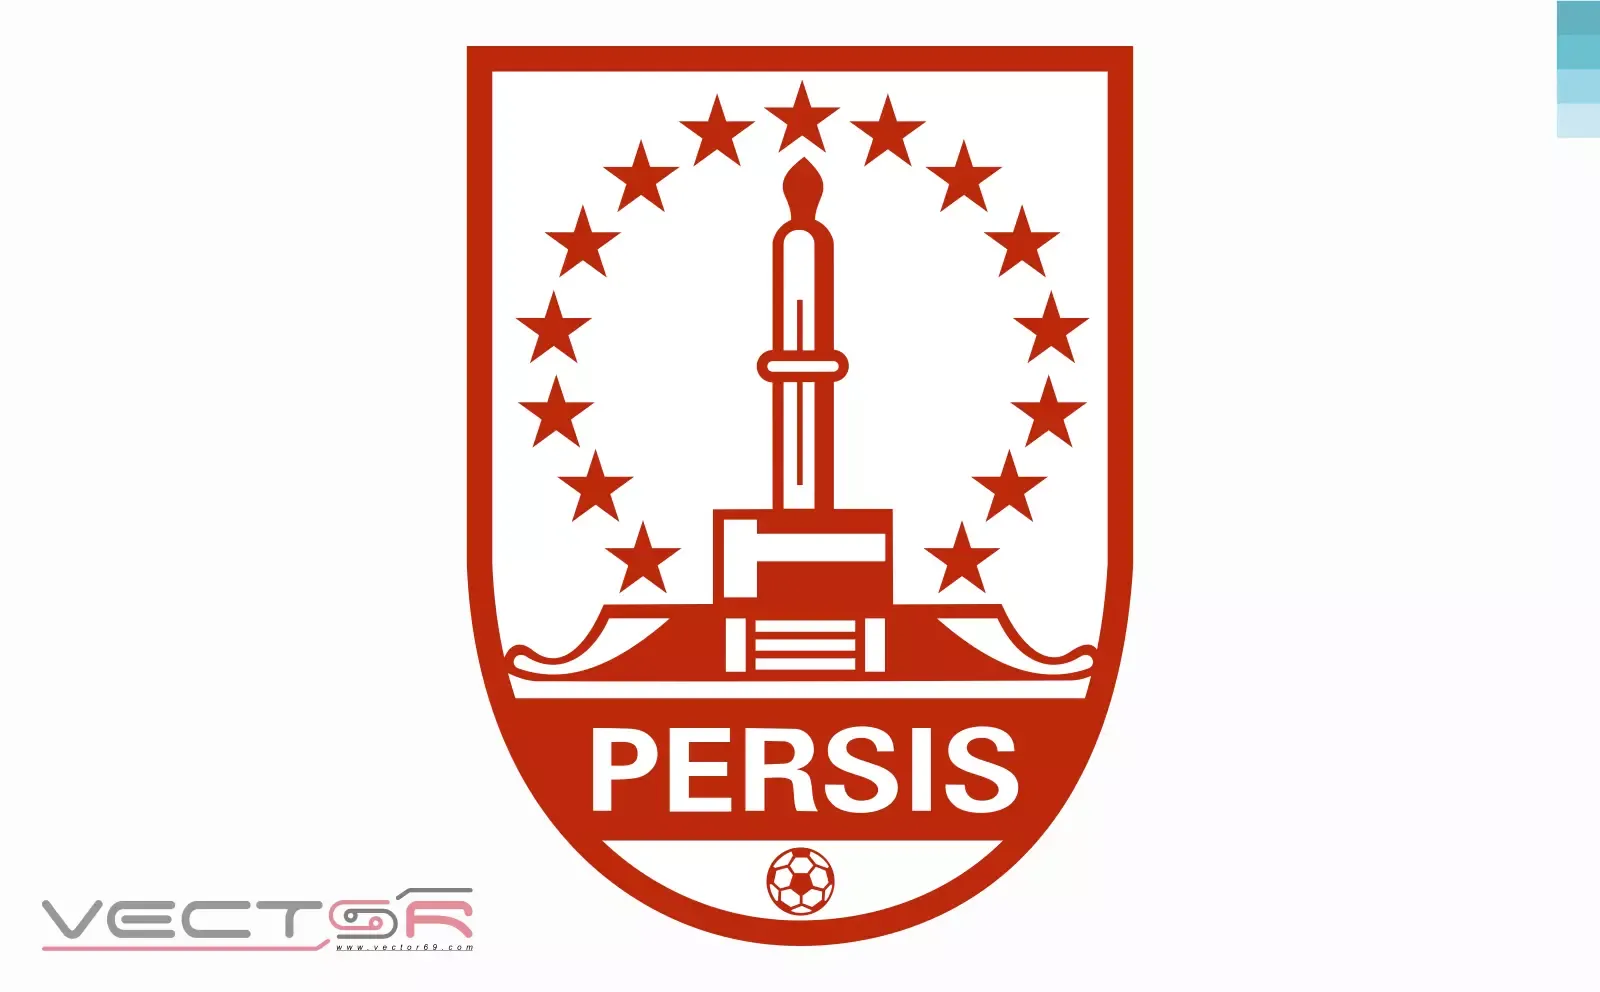 PERSIS Solo Logo - Download Vector File SVG (Scalable Vector Graphics)